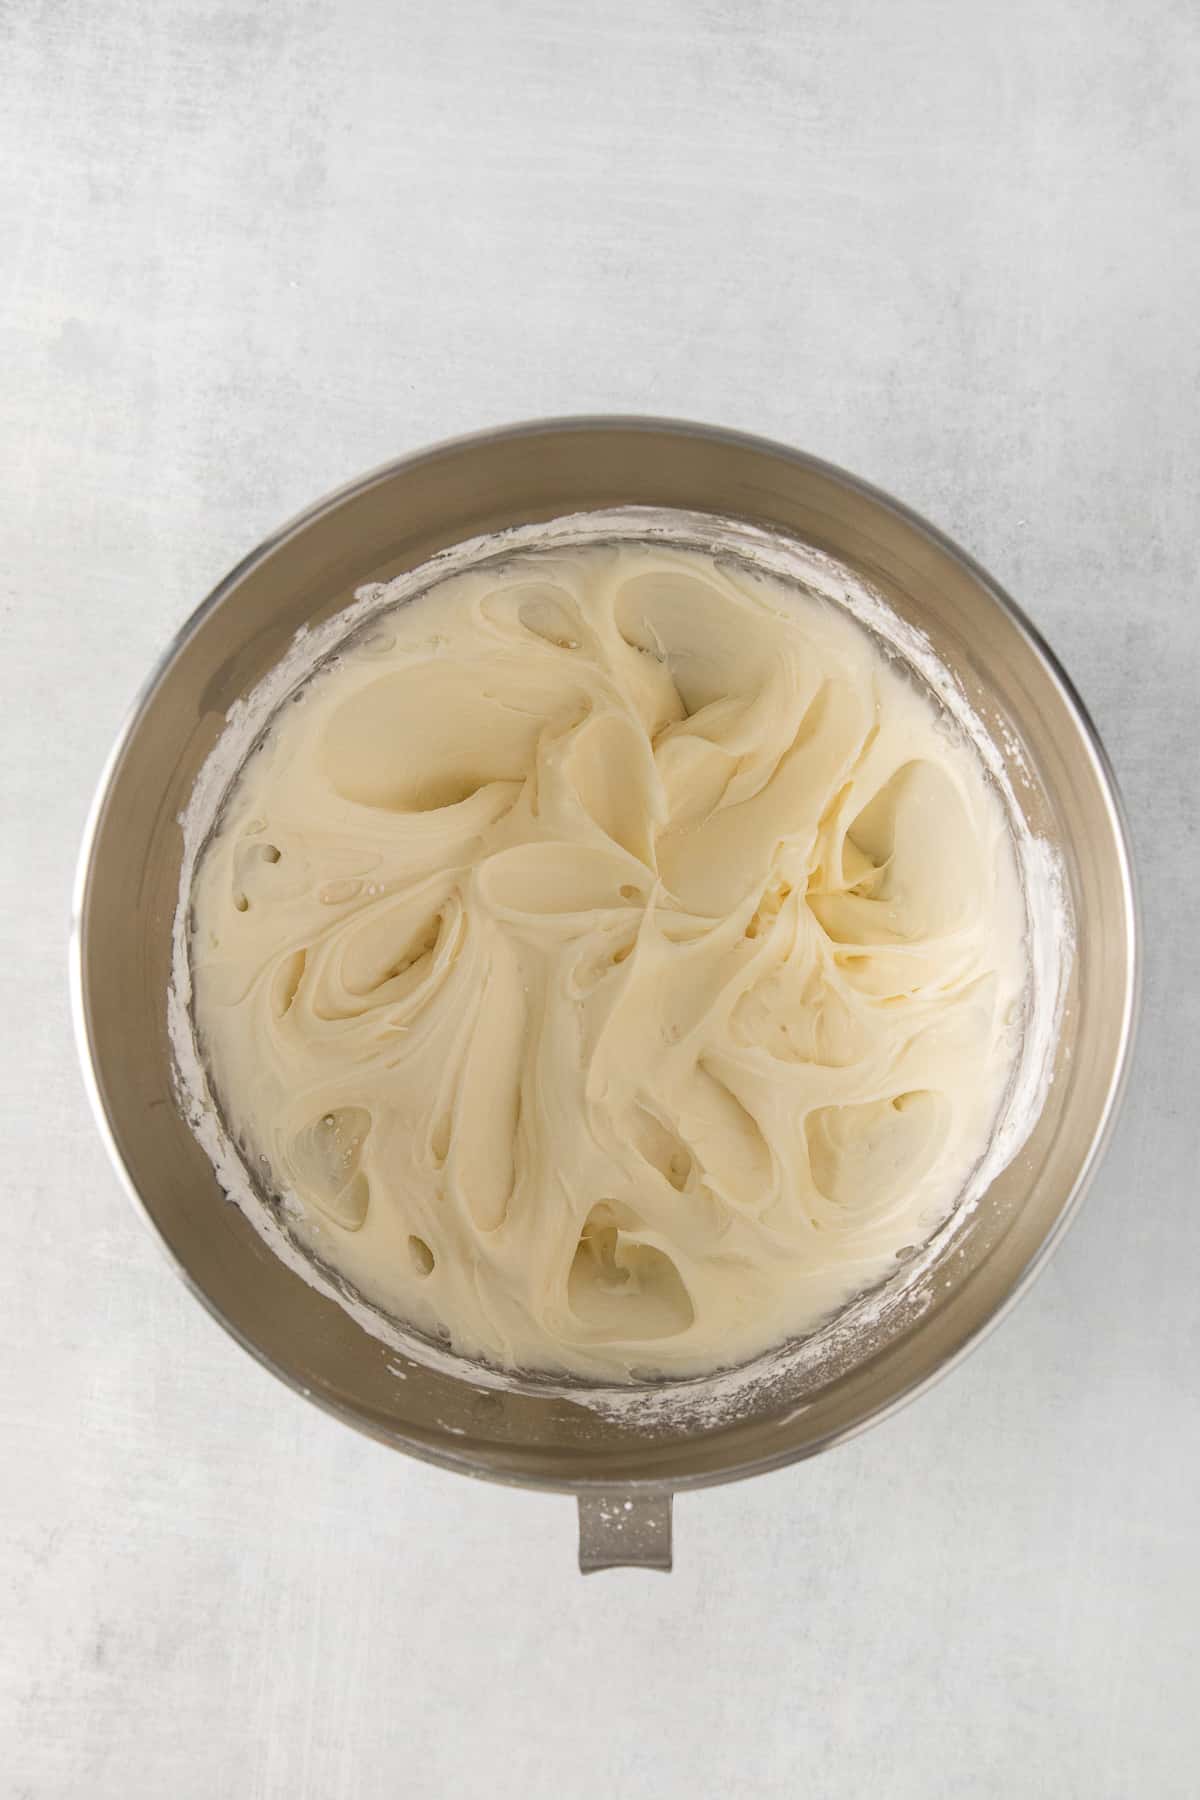 Mascarpone frosting in a mixing bowl.